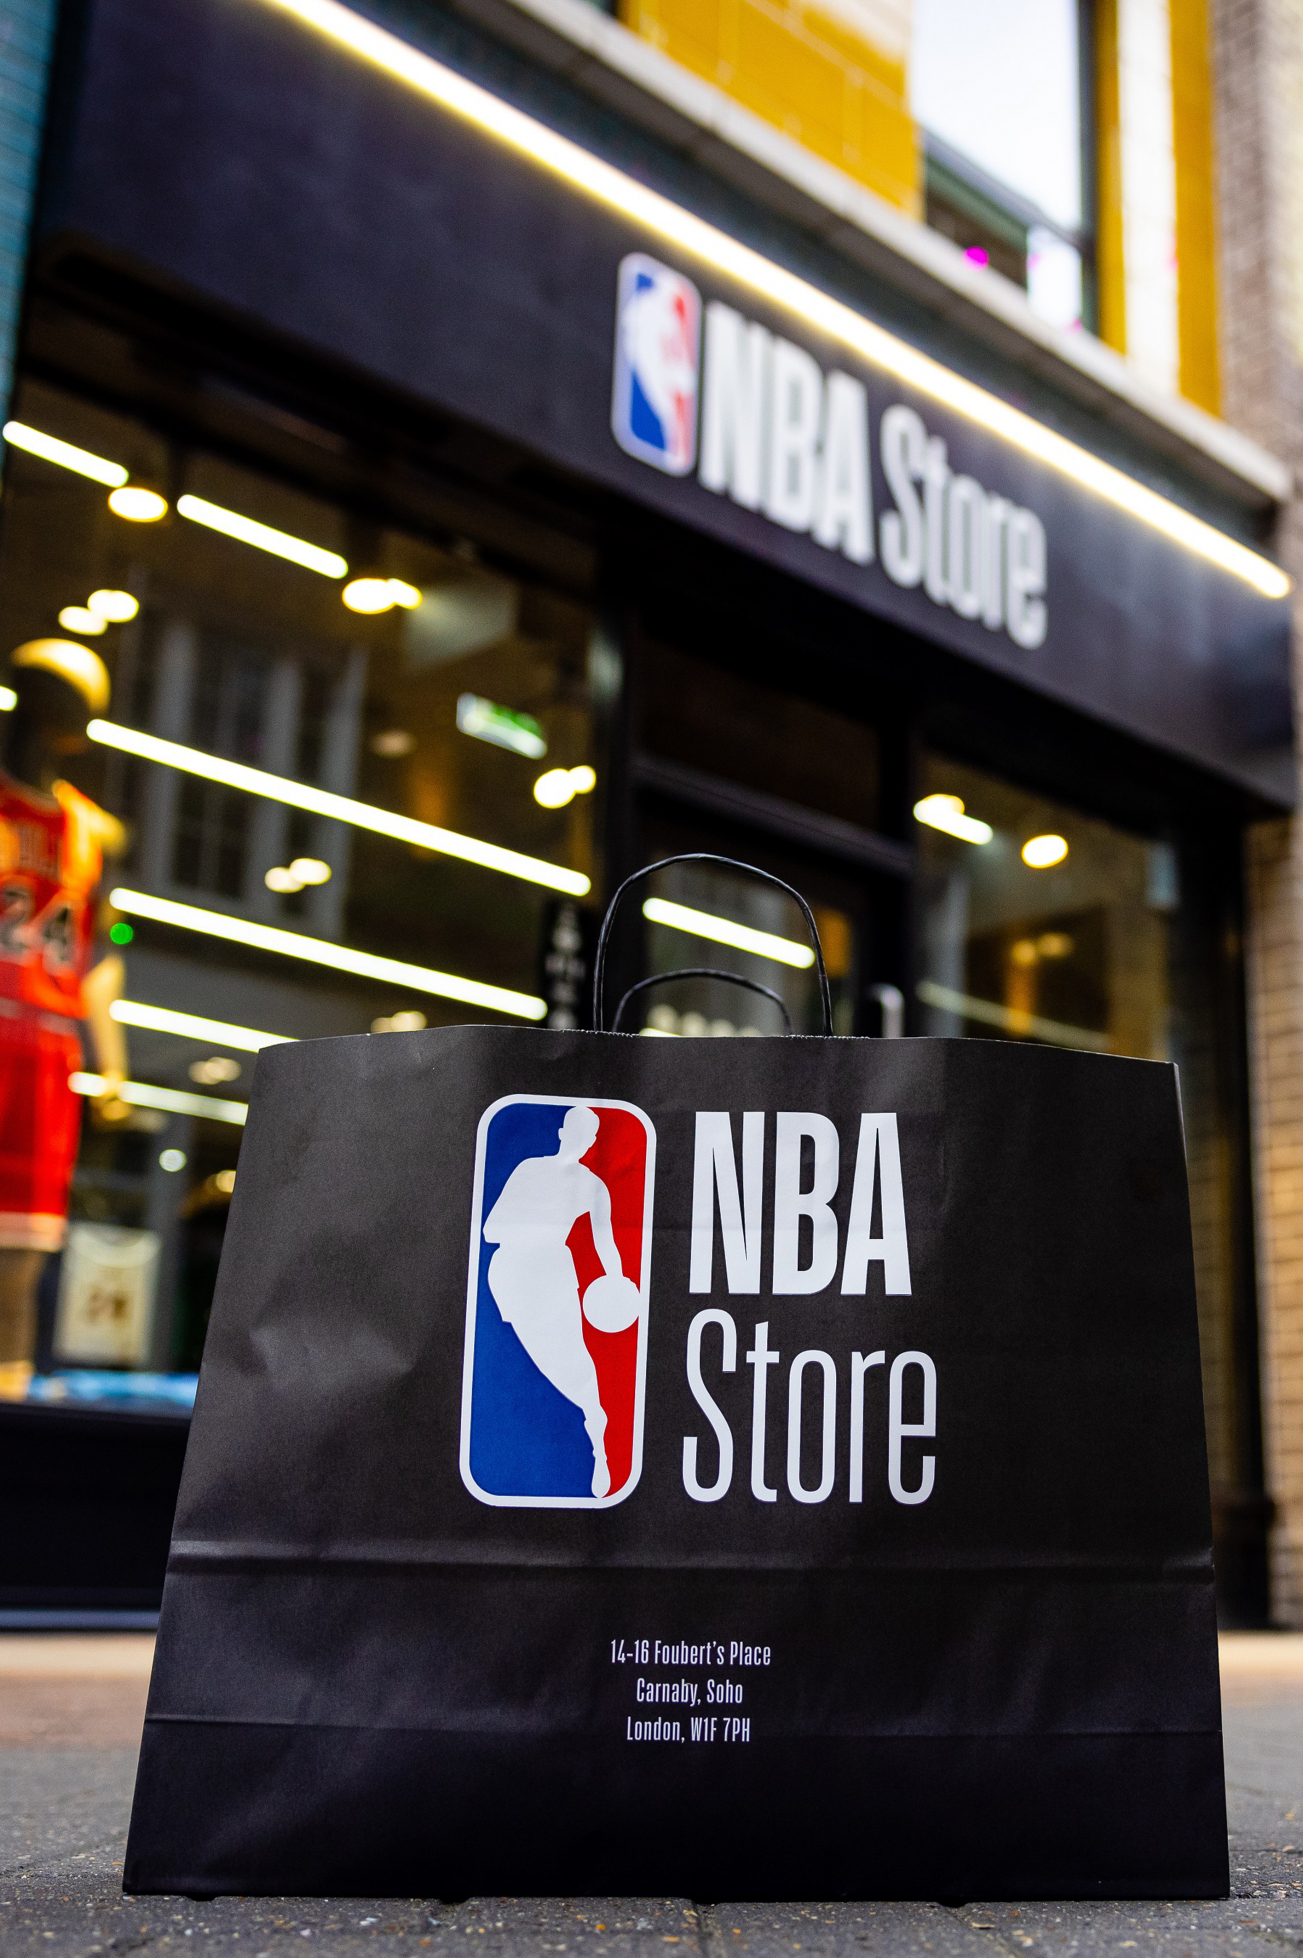 First official NBA store in UK opens in Carnaby, London 